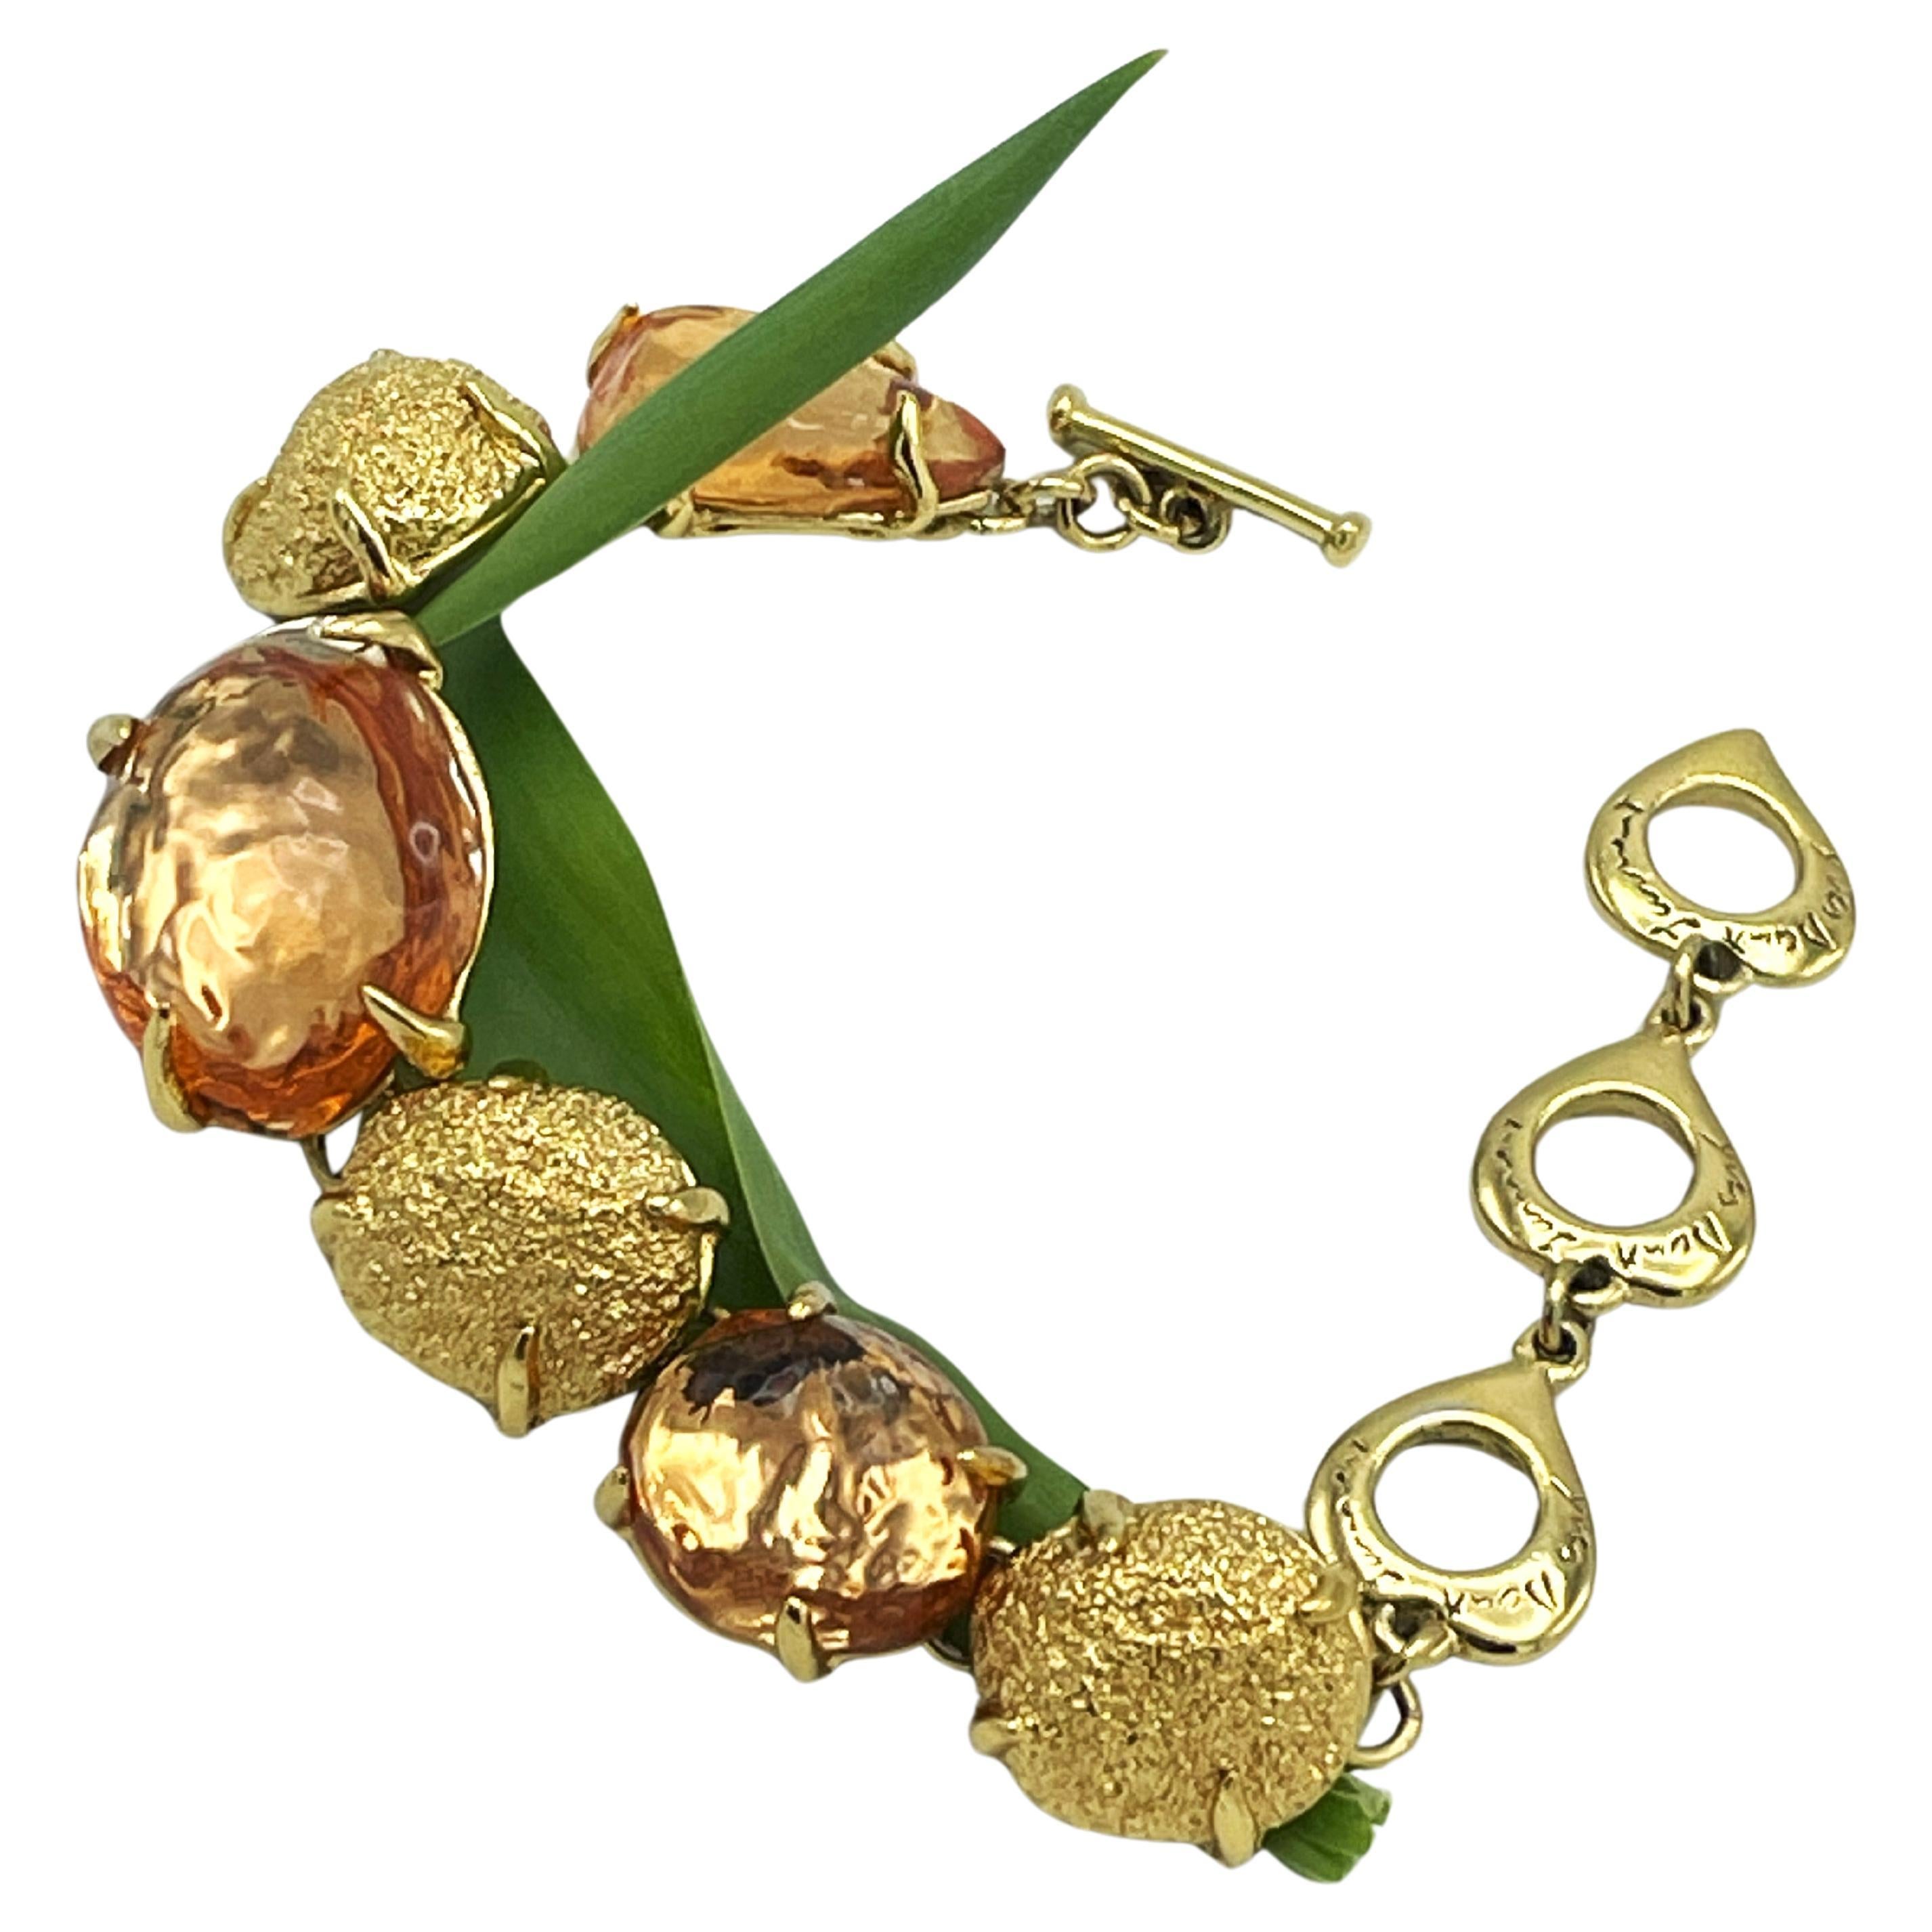 YVES ST. LAURENT PARIS, BRACELET, 3 orange colored Resin and gold tone nuggets  For Sale